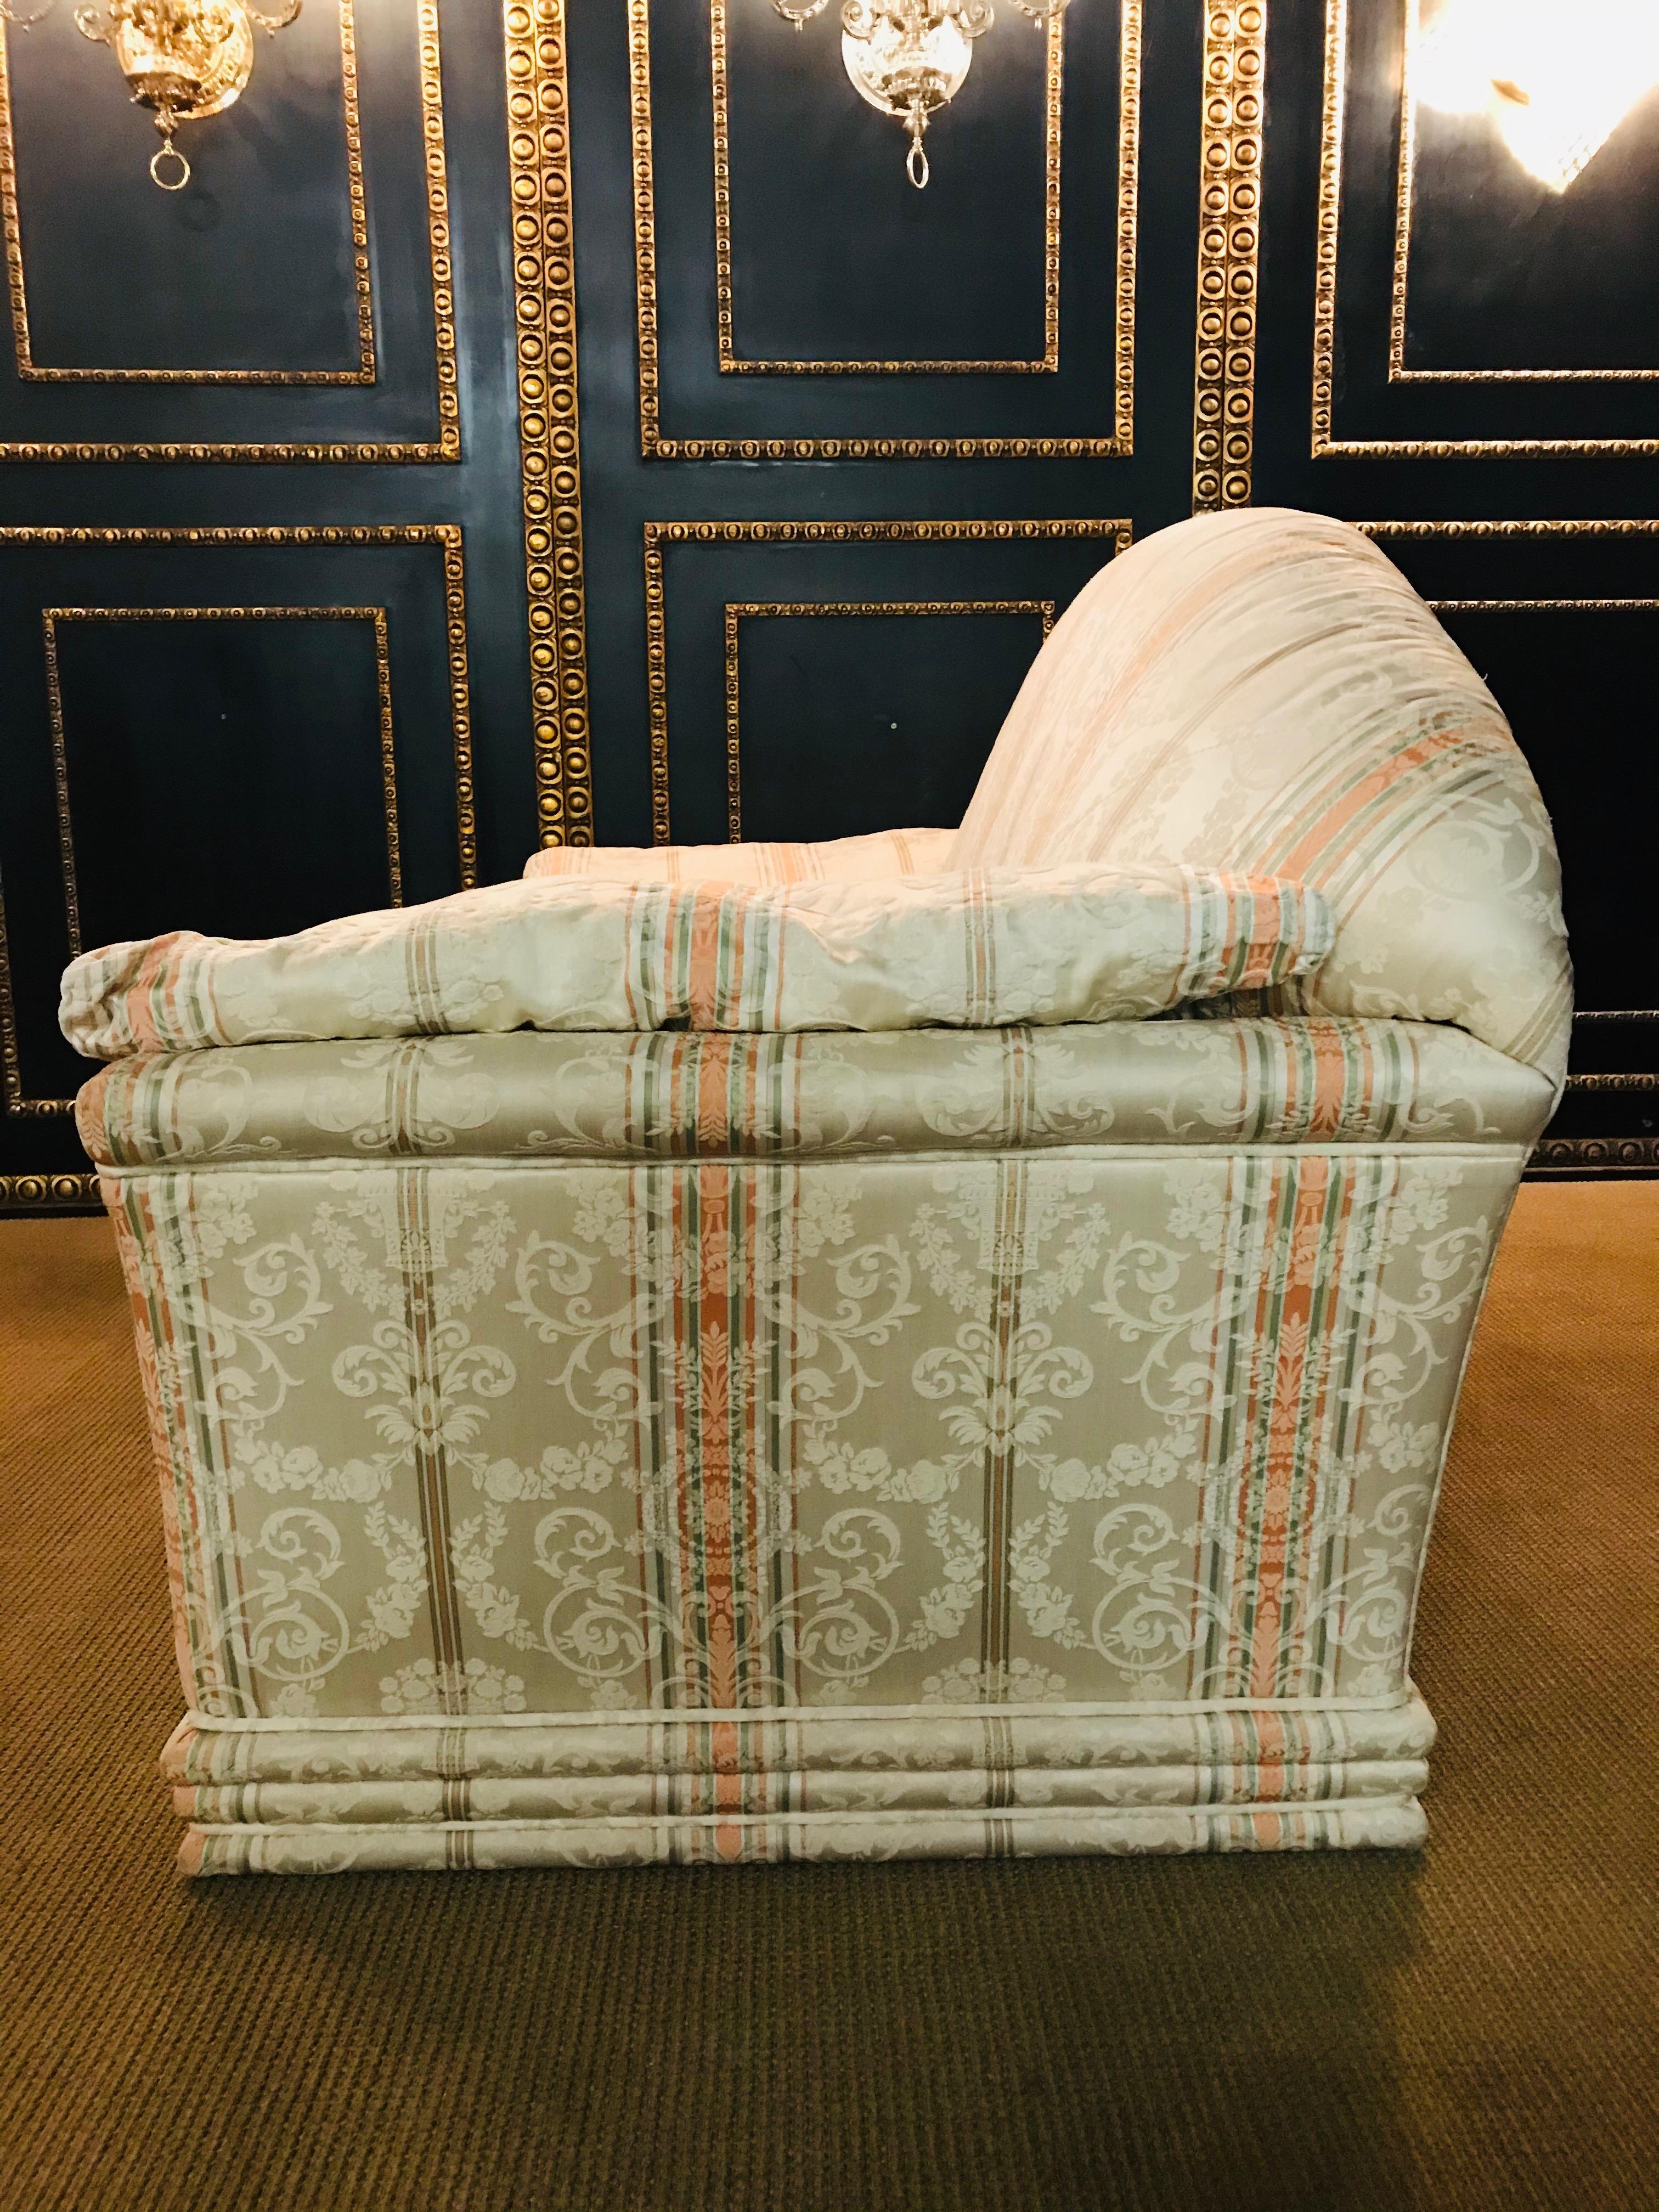 Very High-Quality Couch Set from the Bielefeld Workshops with Baroque Patterns 11